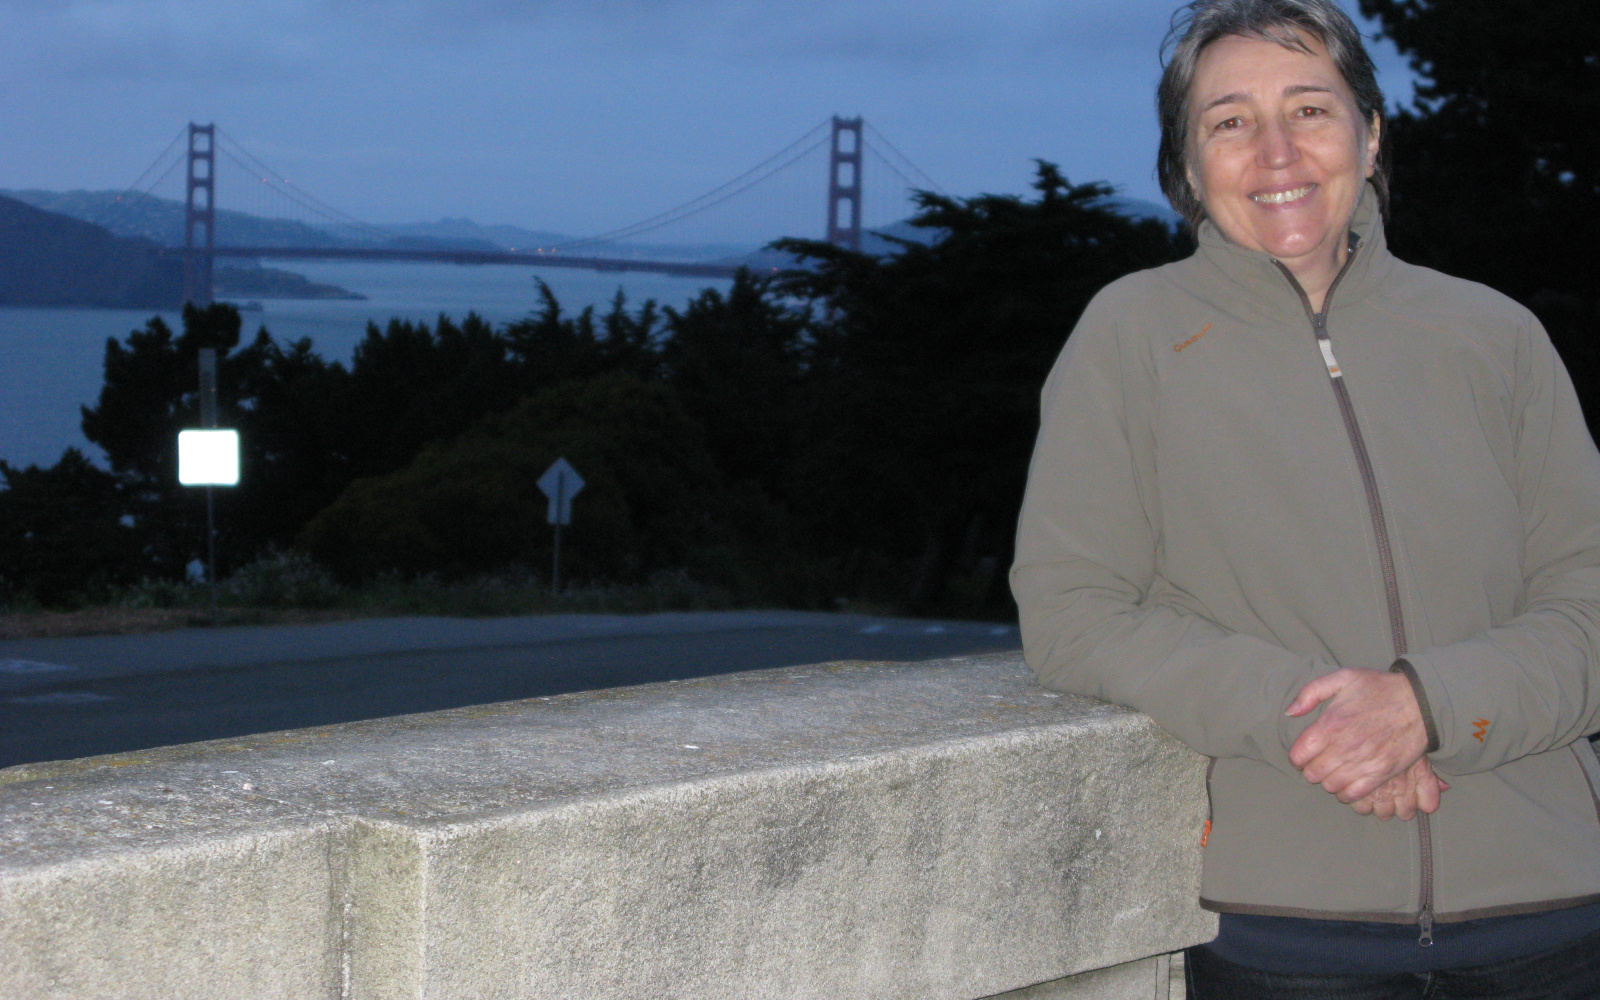 The composer and musicologist Evelyne Gayou in front of the golden gate bridge